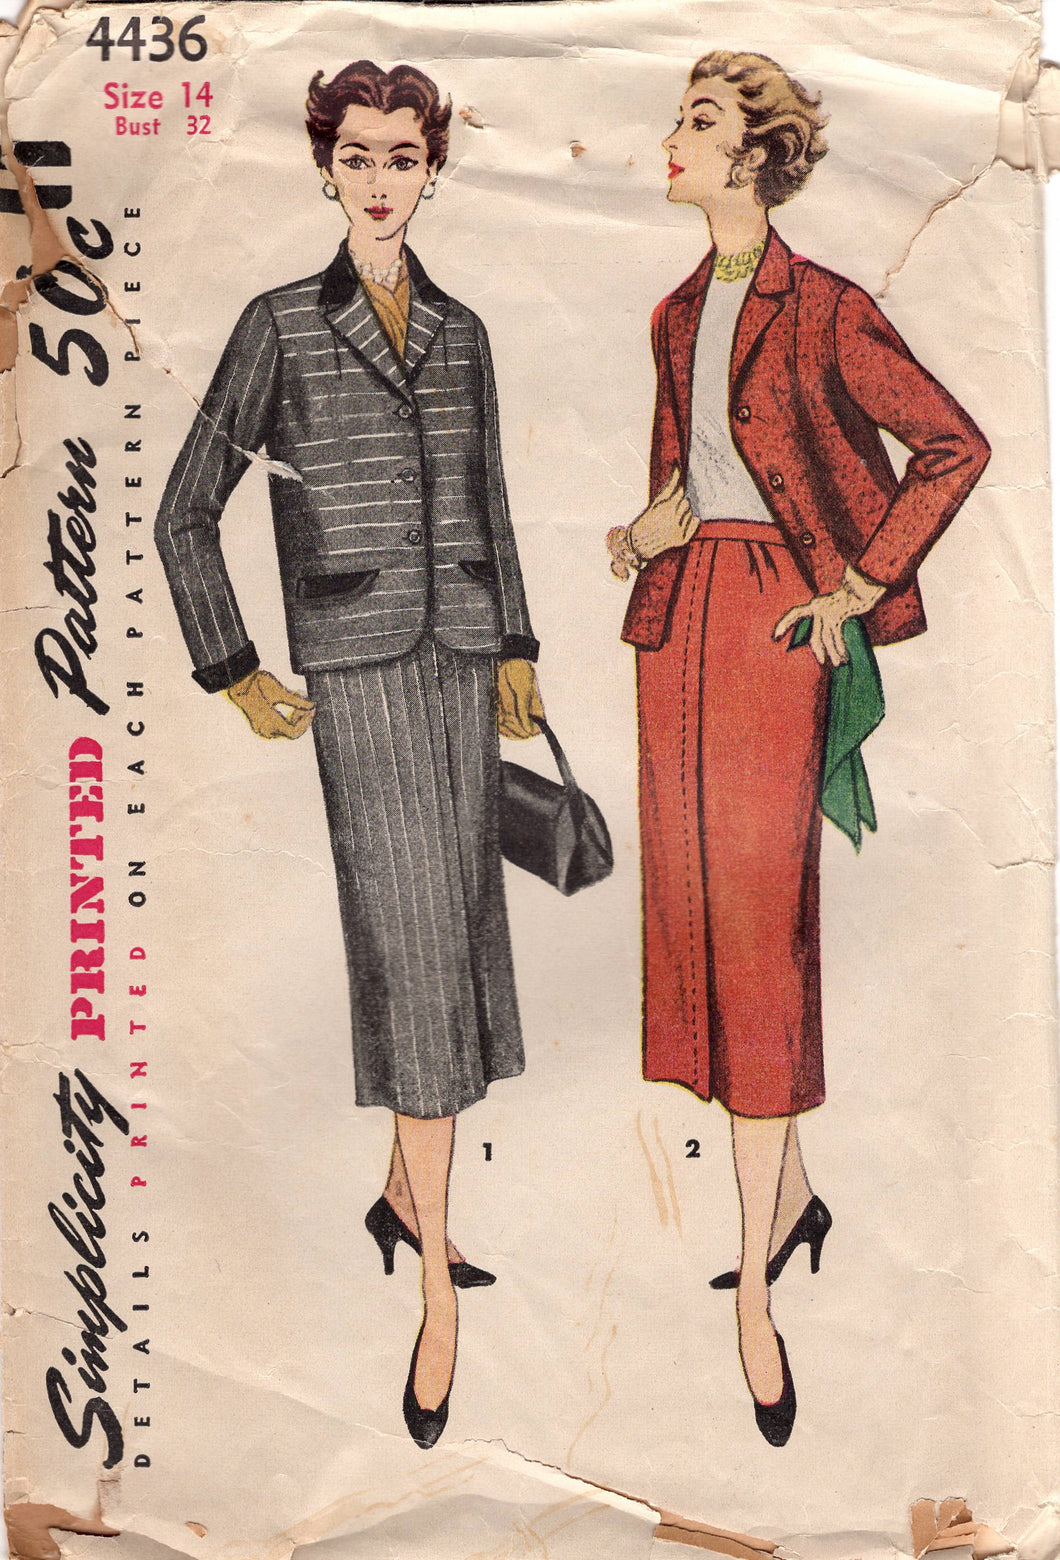 1950's Simplicity Two Piece Boxy Suit Dress Pattern - Bust 32